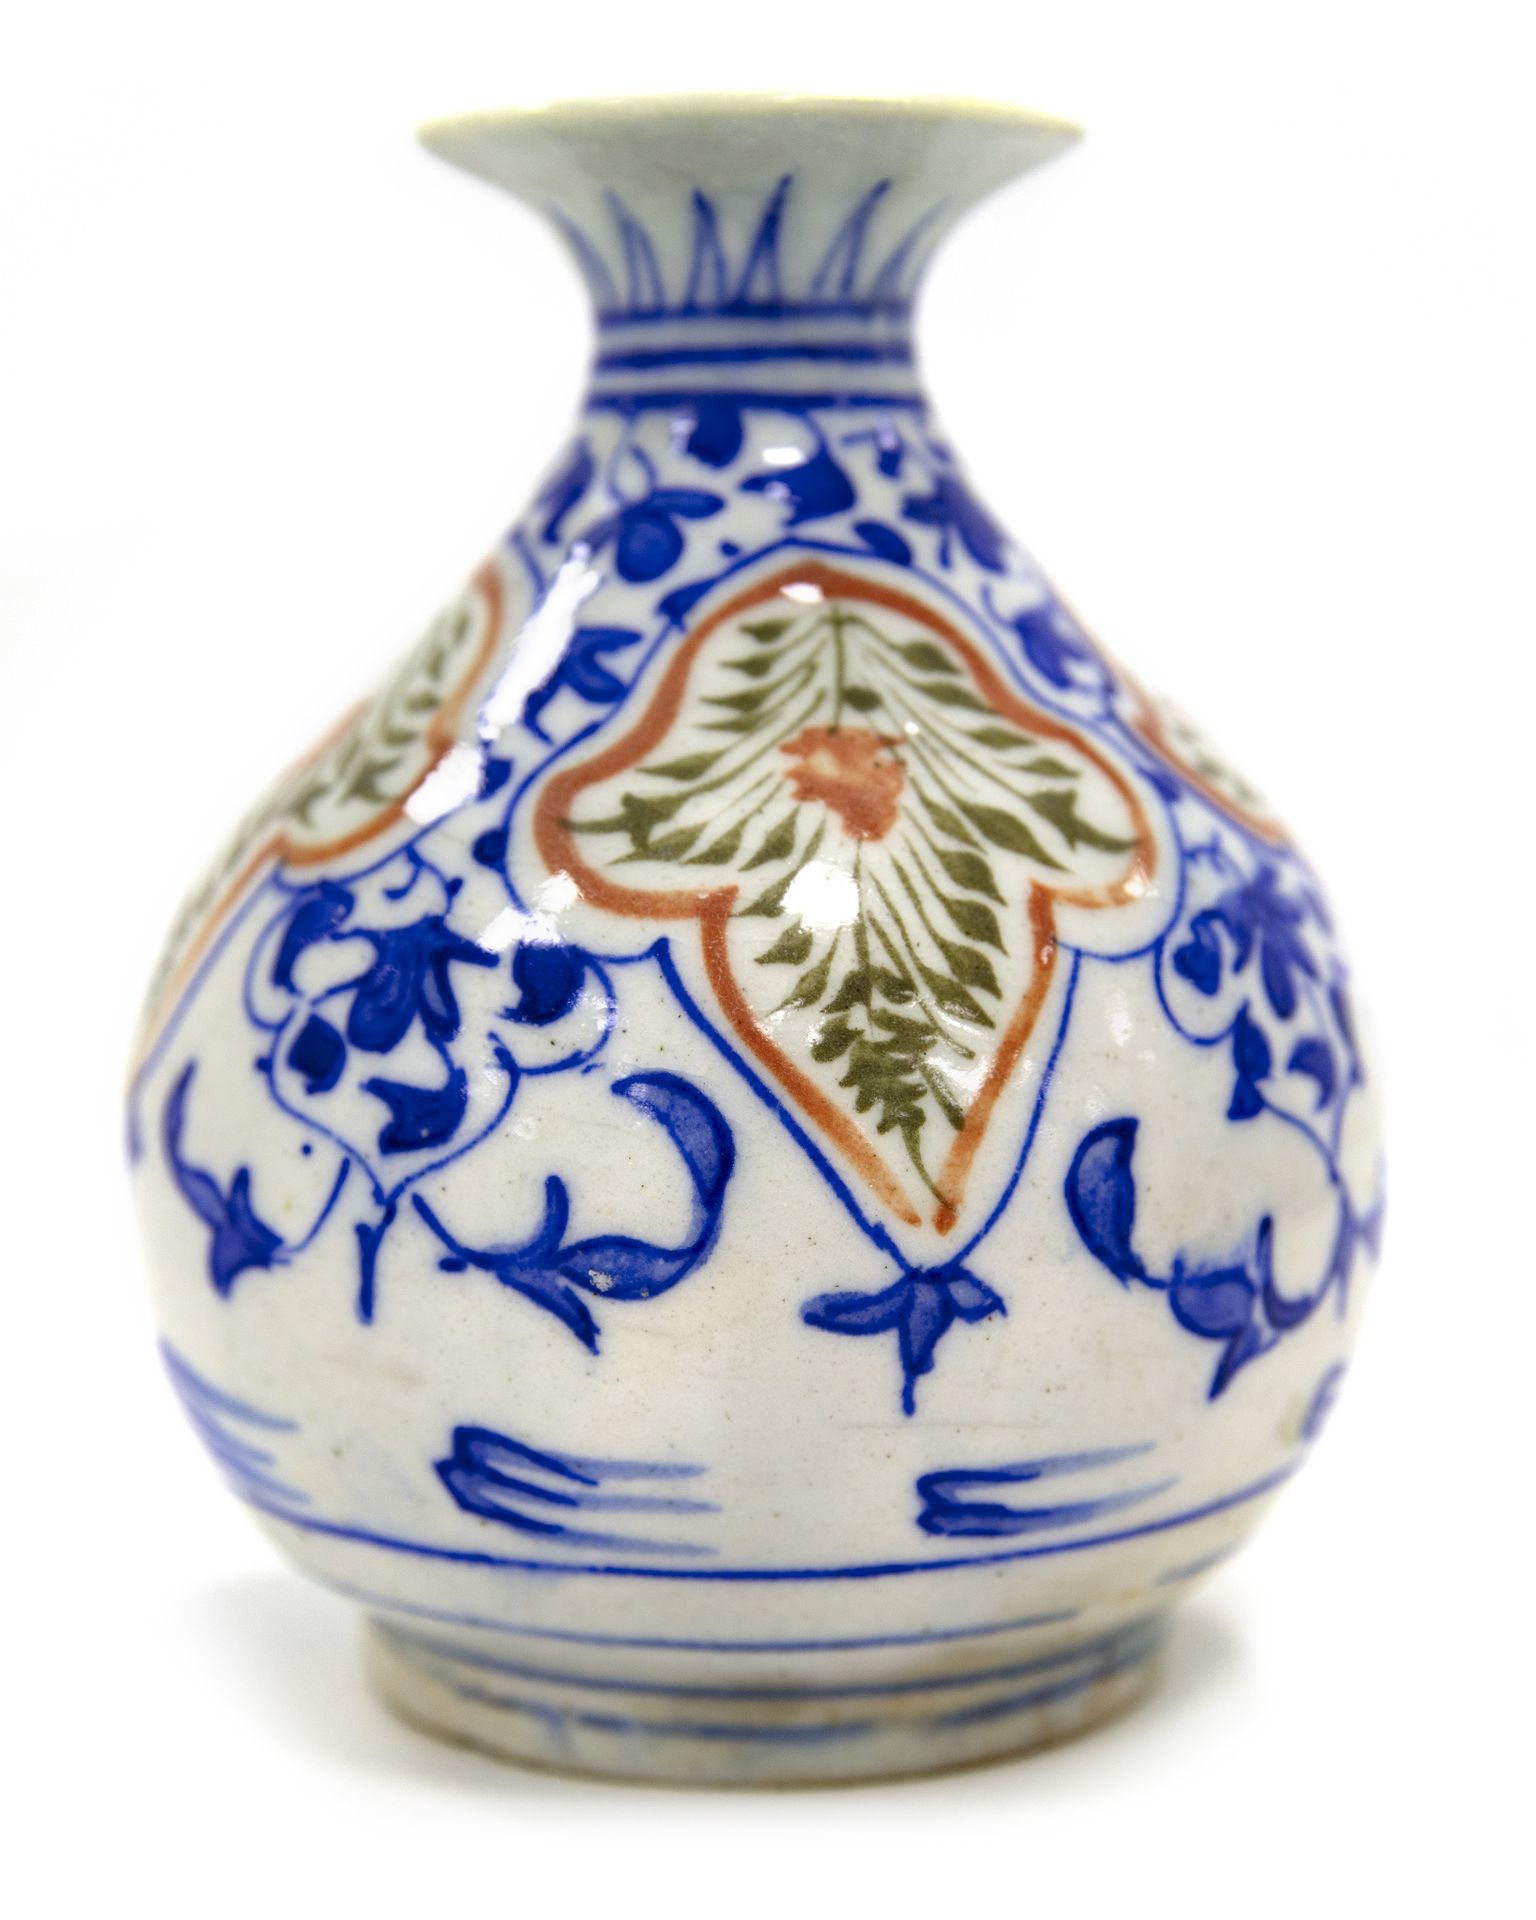 A SAFAVID RED AND BLUE KIRMAN POTTERY QALYAN BASE (WATER PIPE), PERSIA, 17TH CENTURY - Image 2 of 3